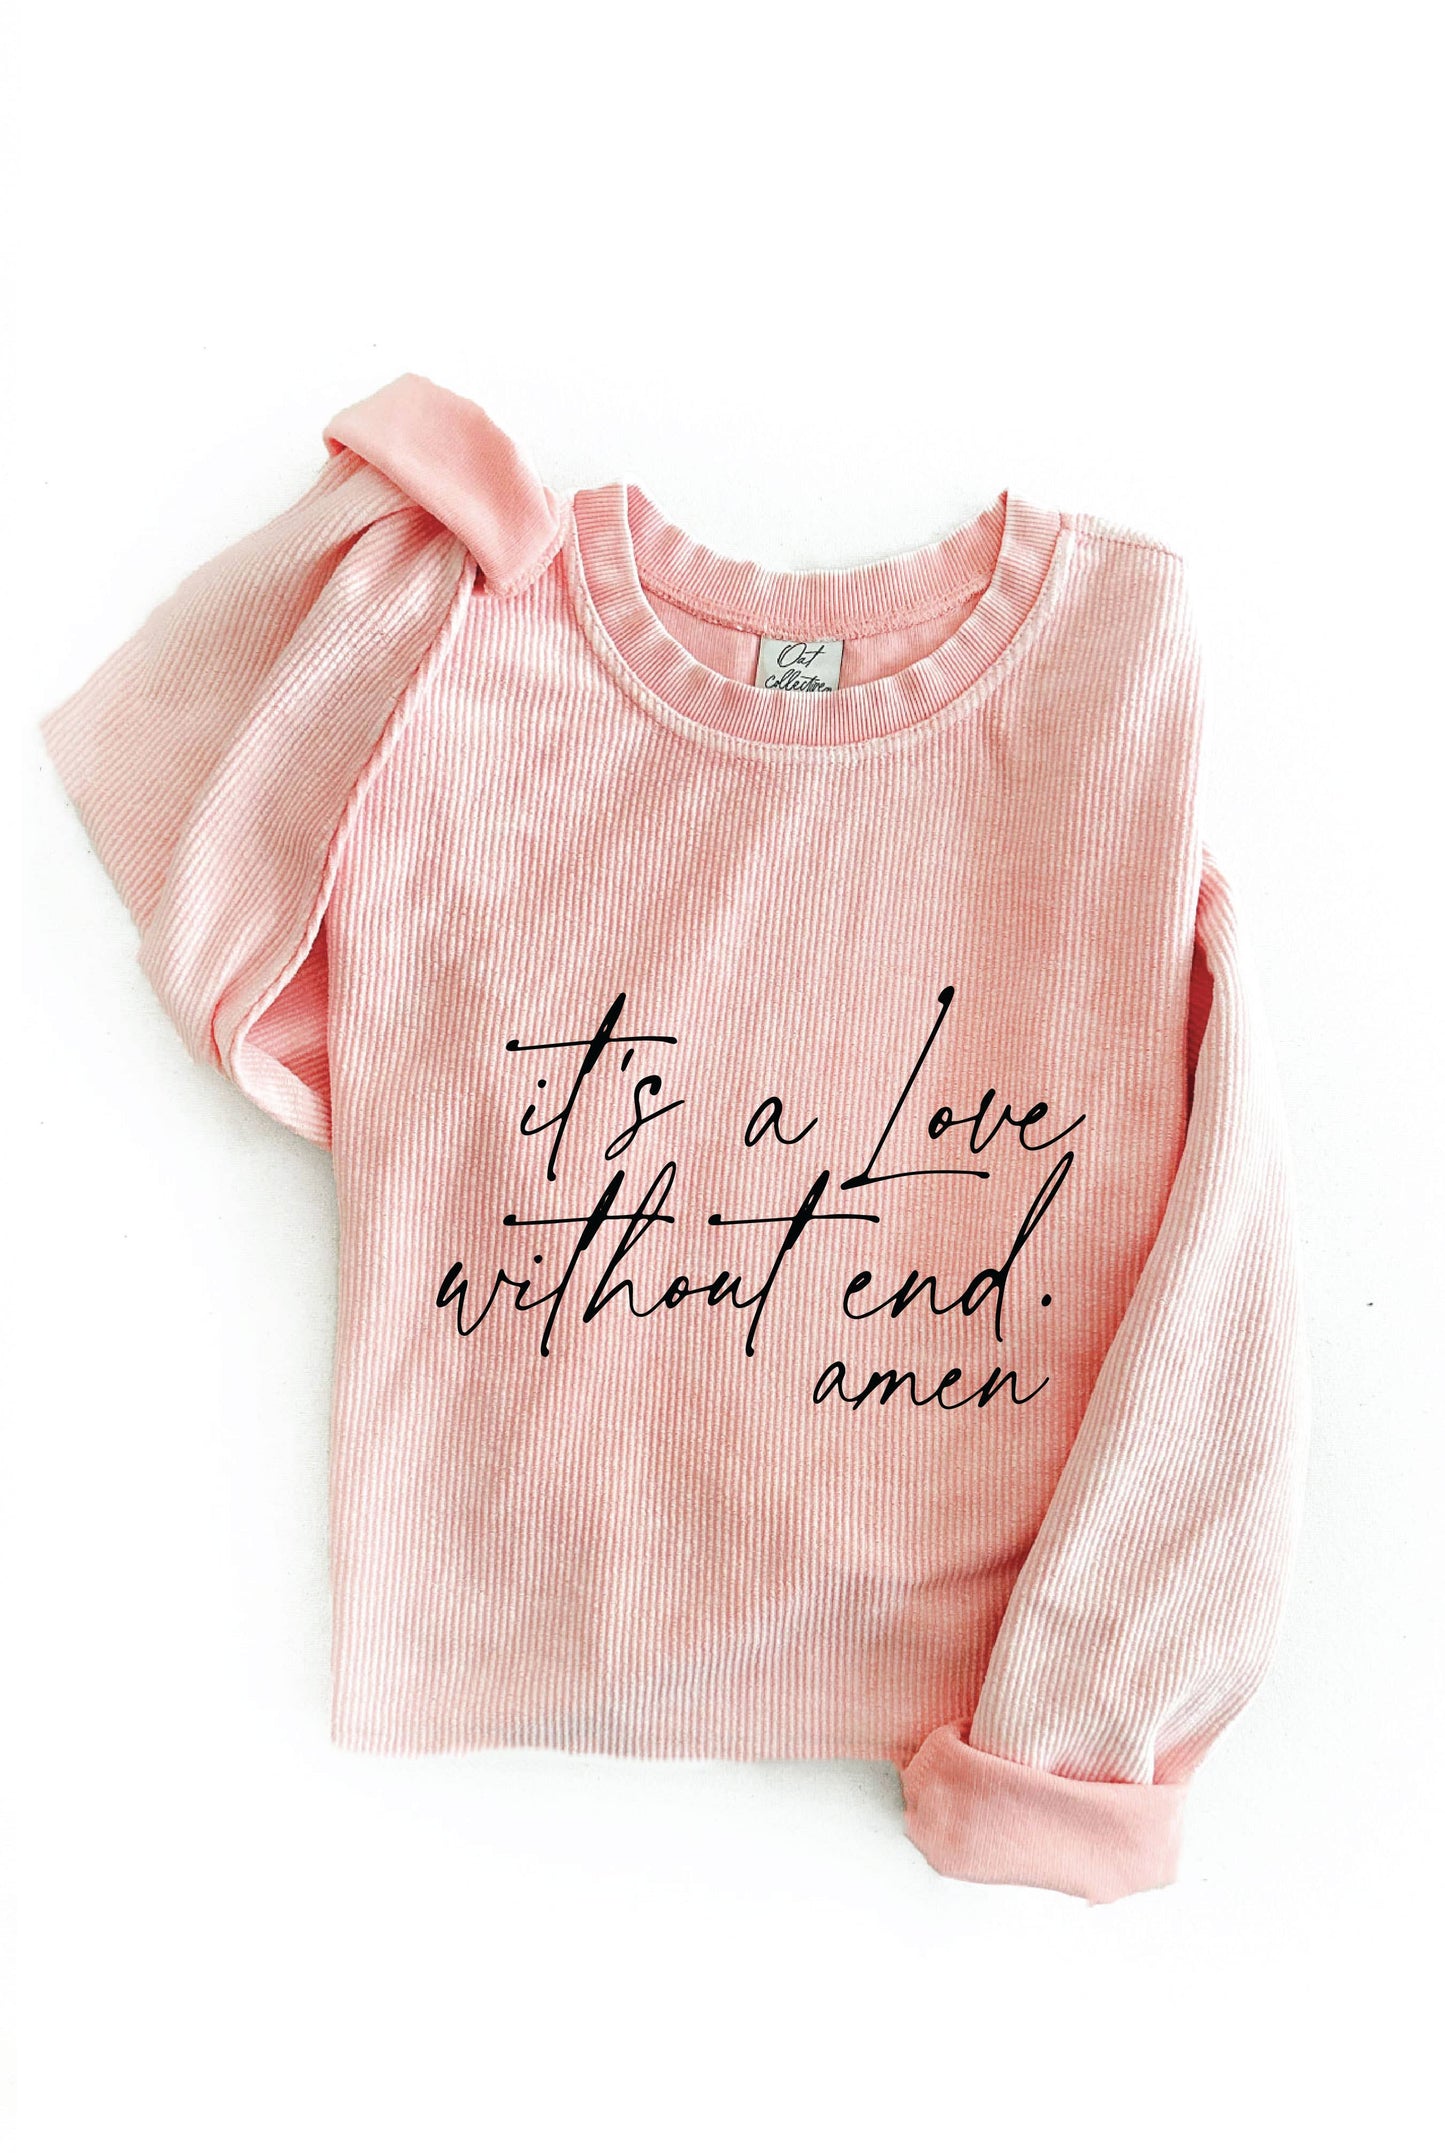 IT'S A LOVE WITHOUT END. AMEN Thermal Vintage Pullover: M / VINTAGE CHARCOAL